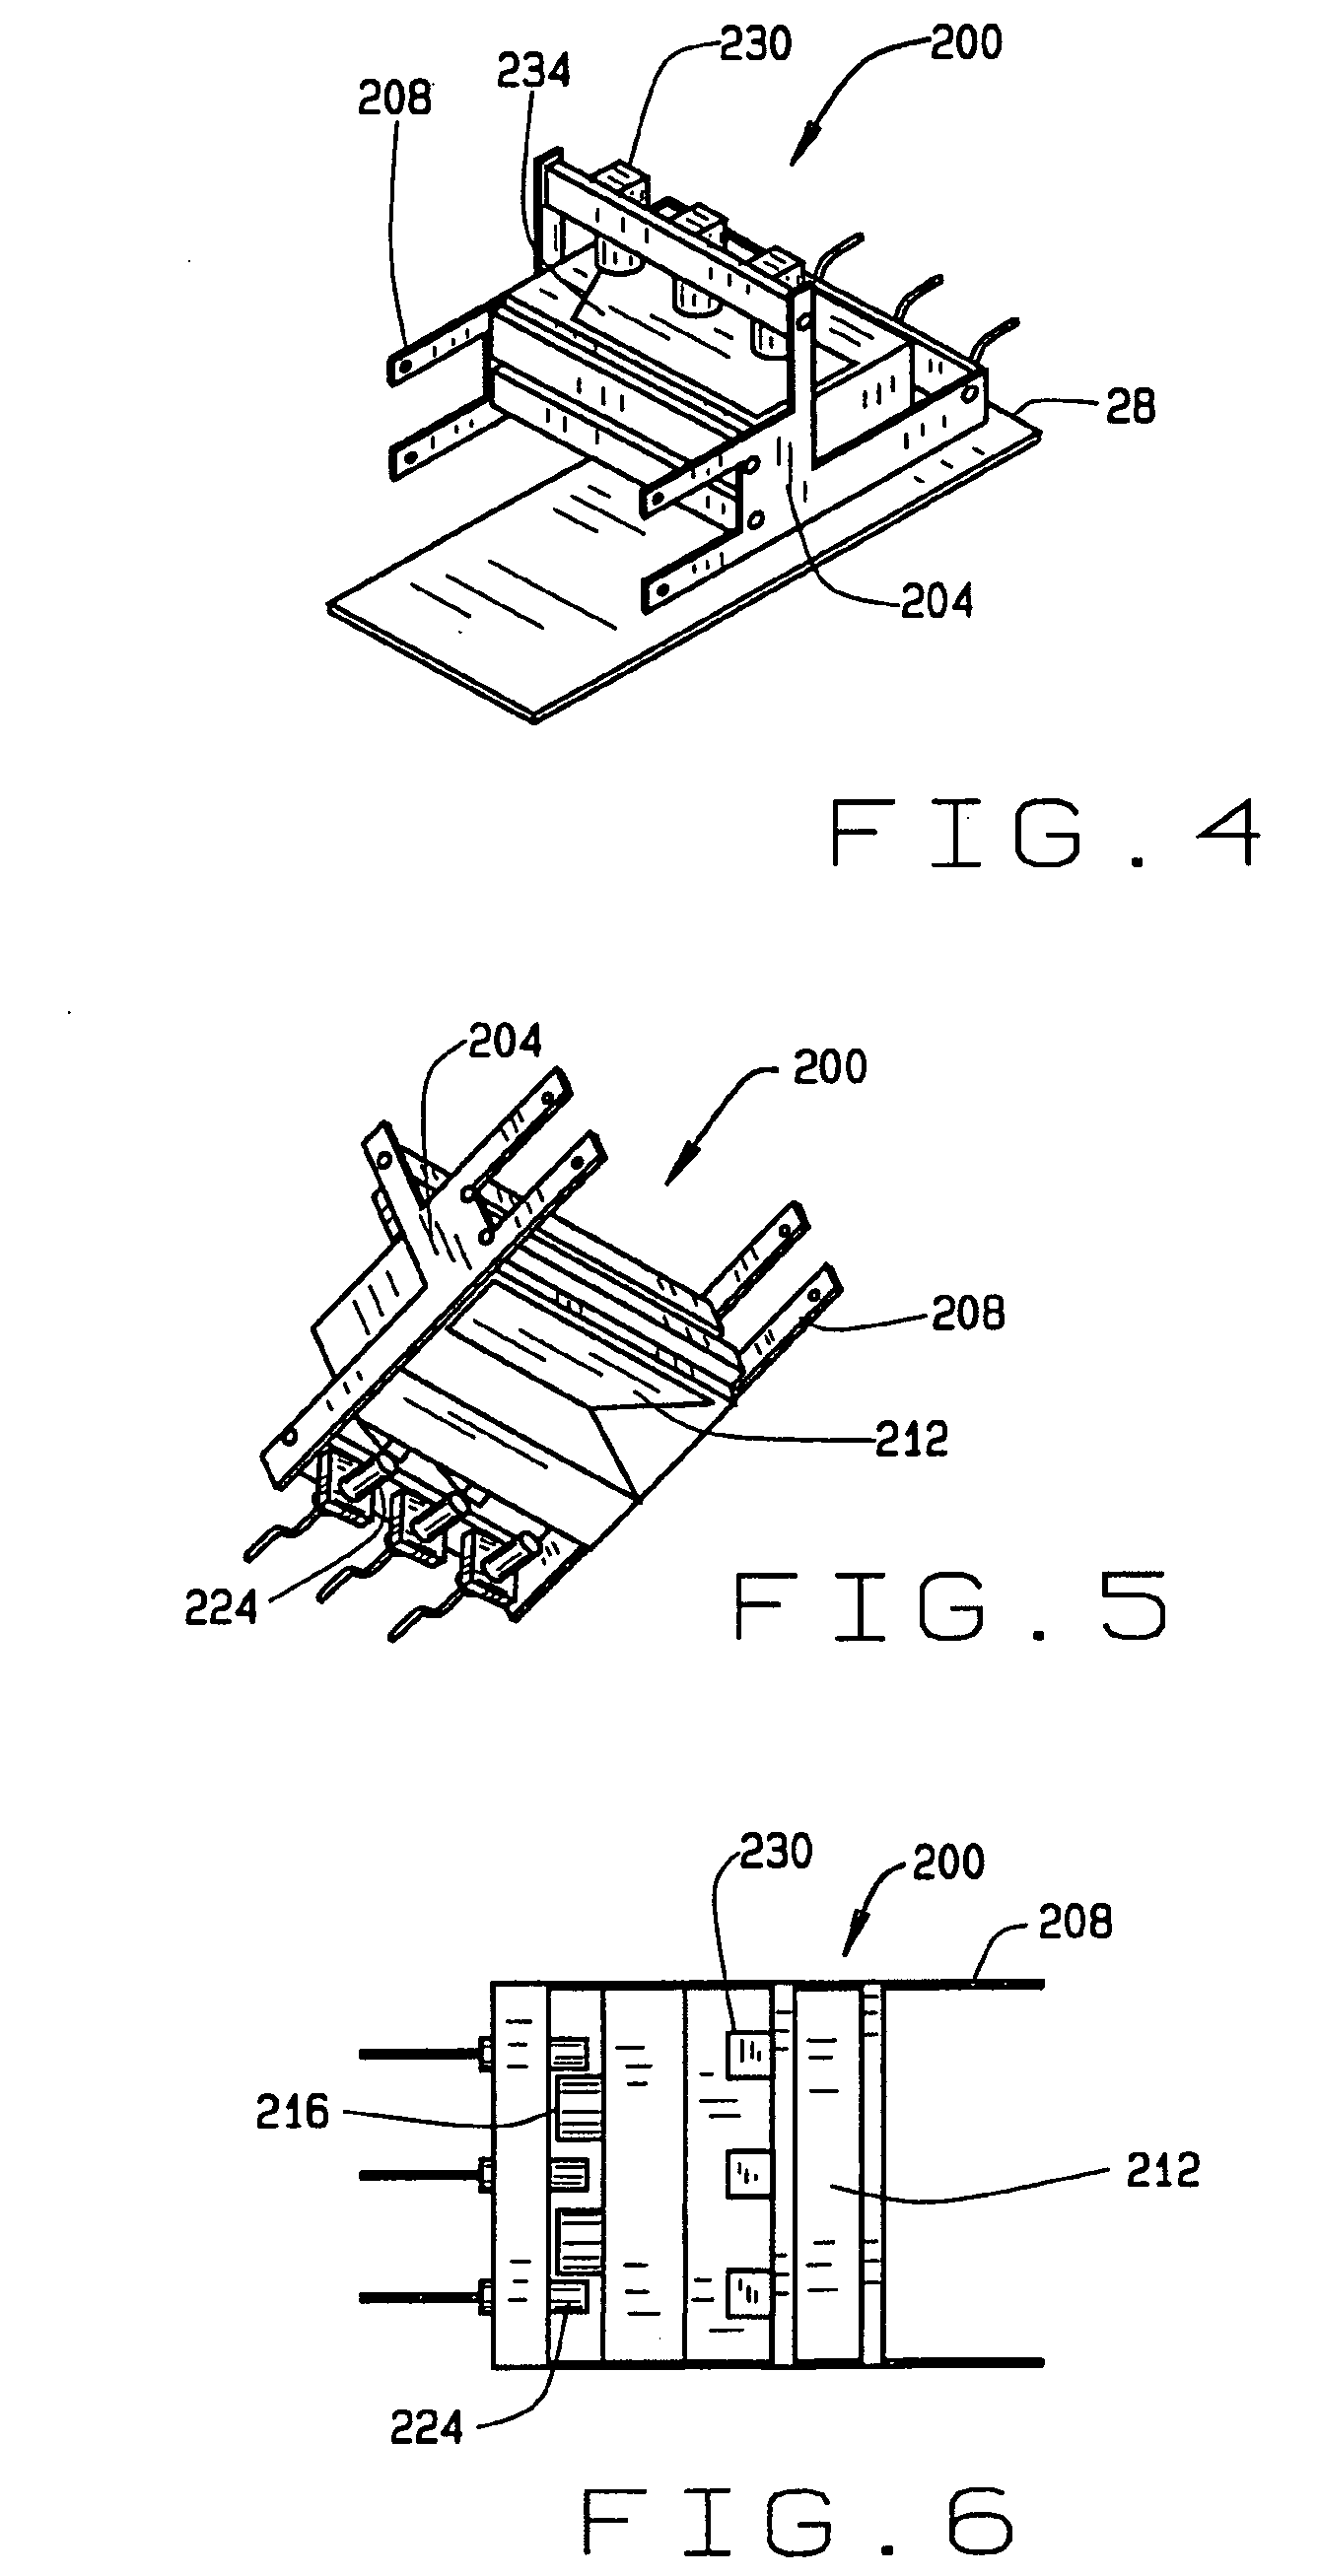 Apparatus and methods for inspecting a composite structure for defects